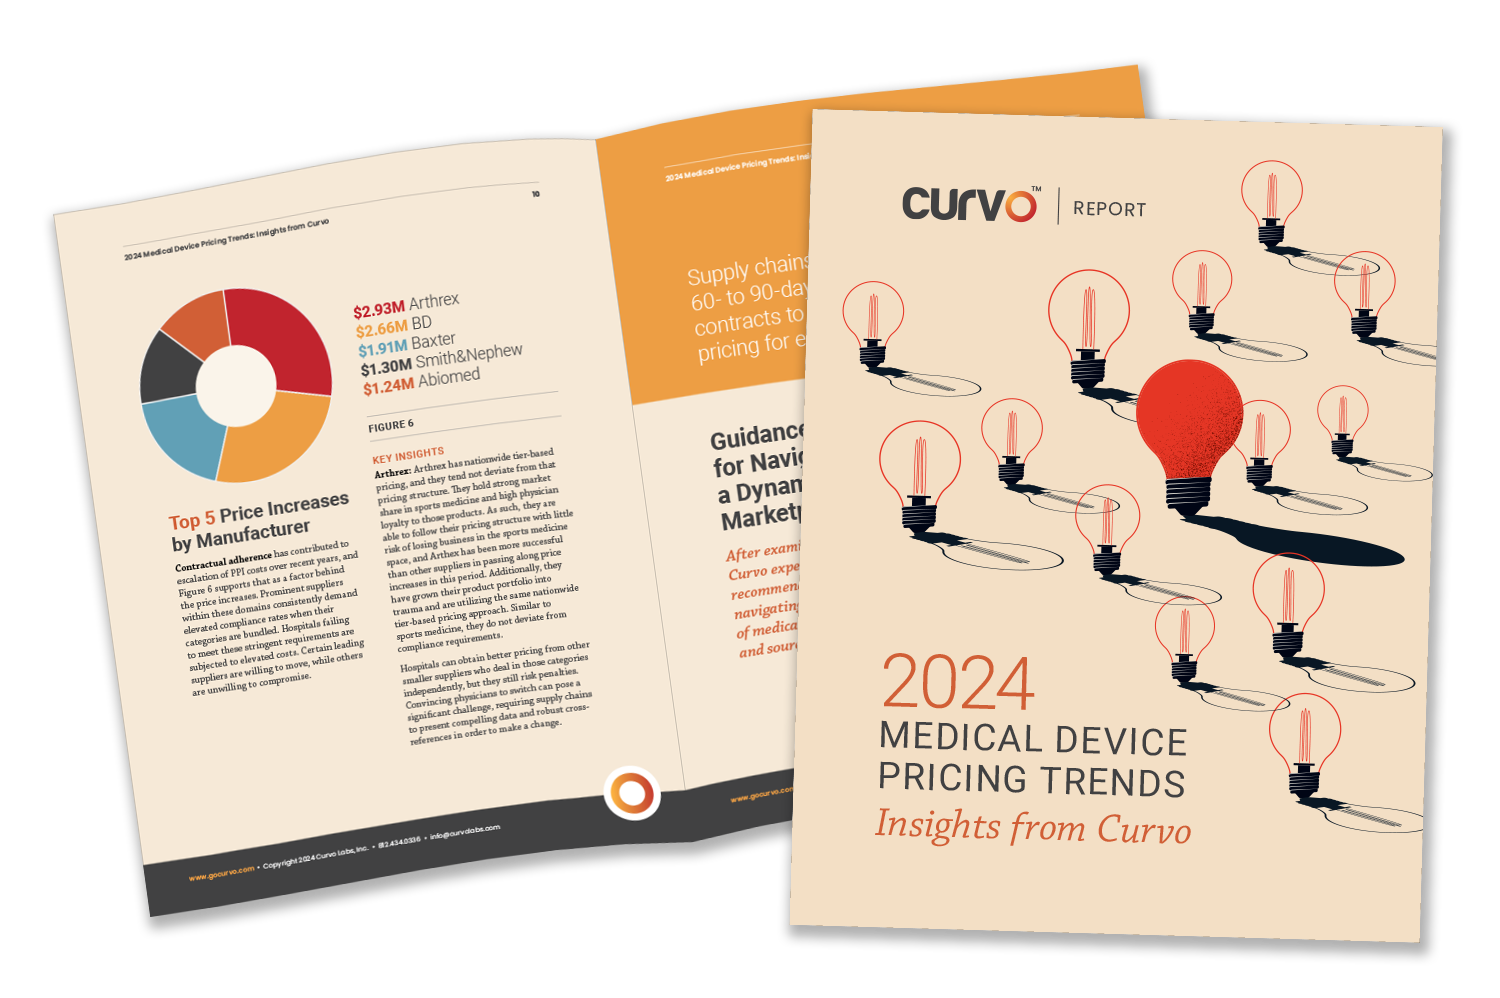 Report: 2024 Medical Device Pricing Trends